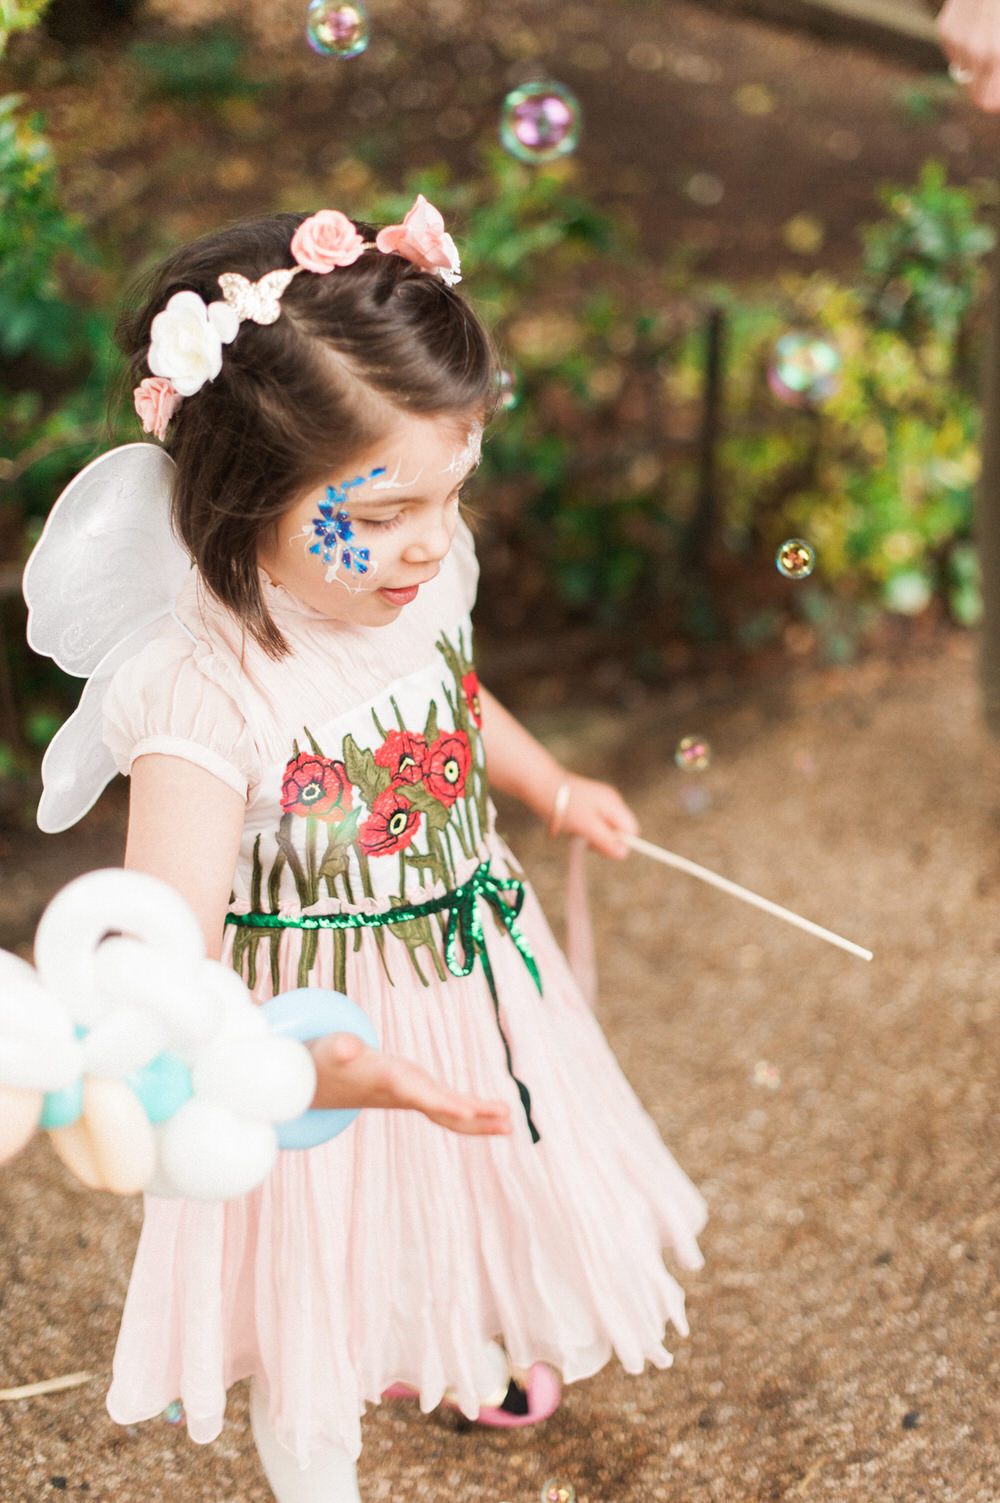 Fairy fancy dress | Childrens fancy dress | Fairy | A Midsummer nights dream inspired children's birthday party with stunning floral, fairy entertainment, crafts and a picnic. Photos by Kate Nielen.